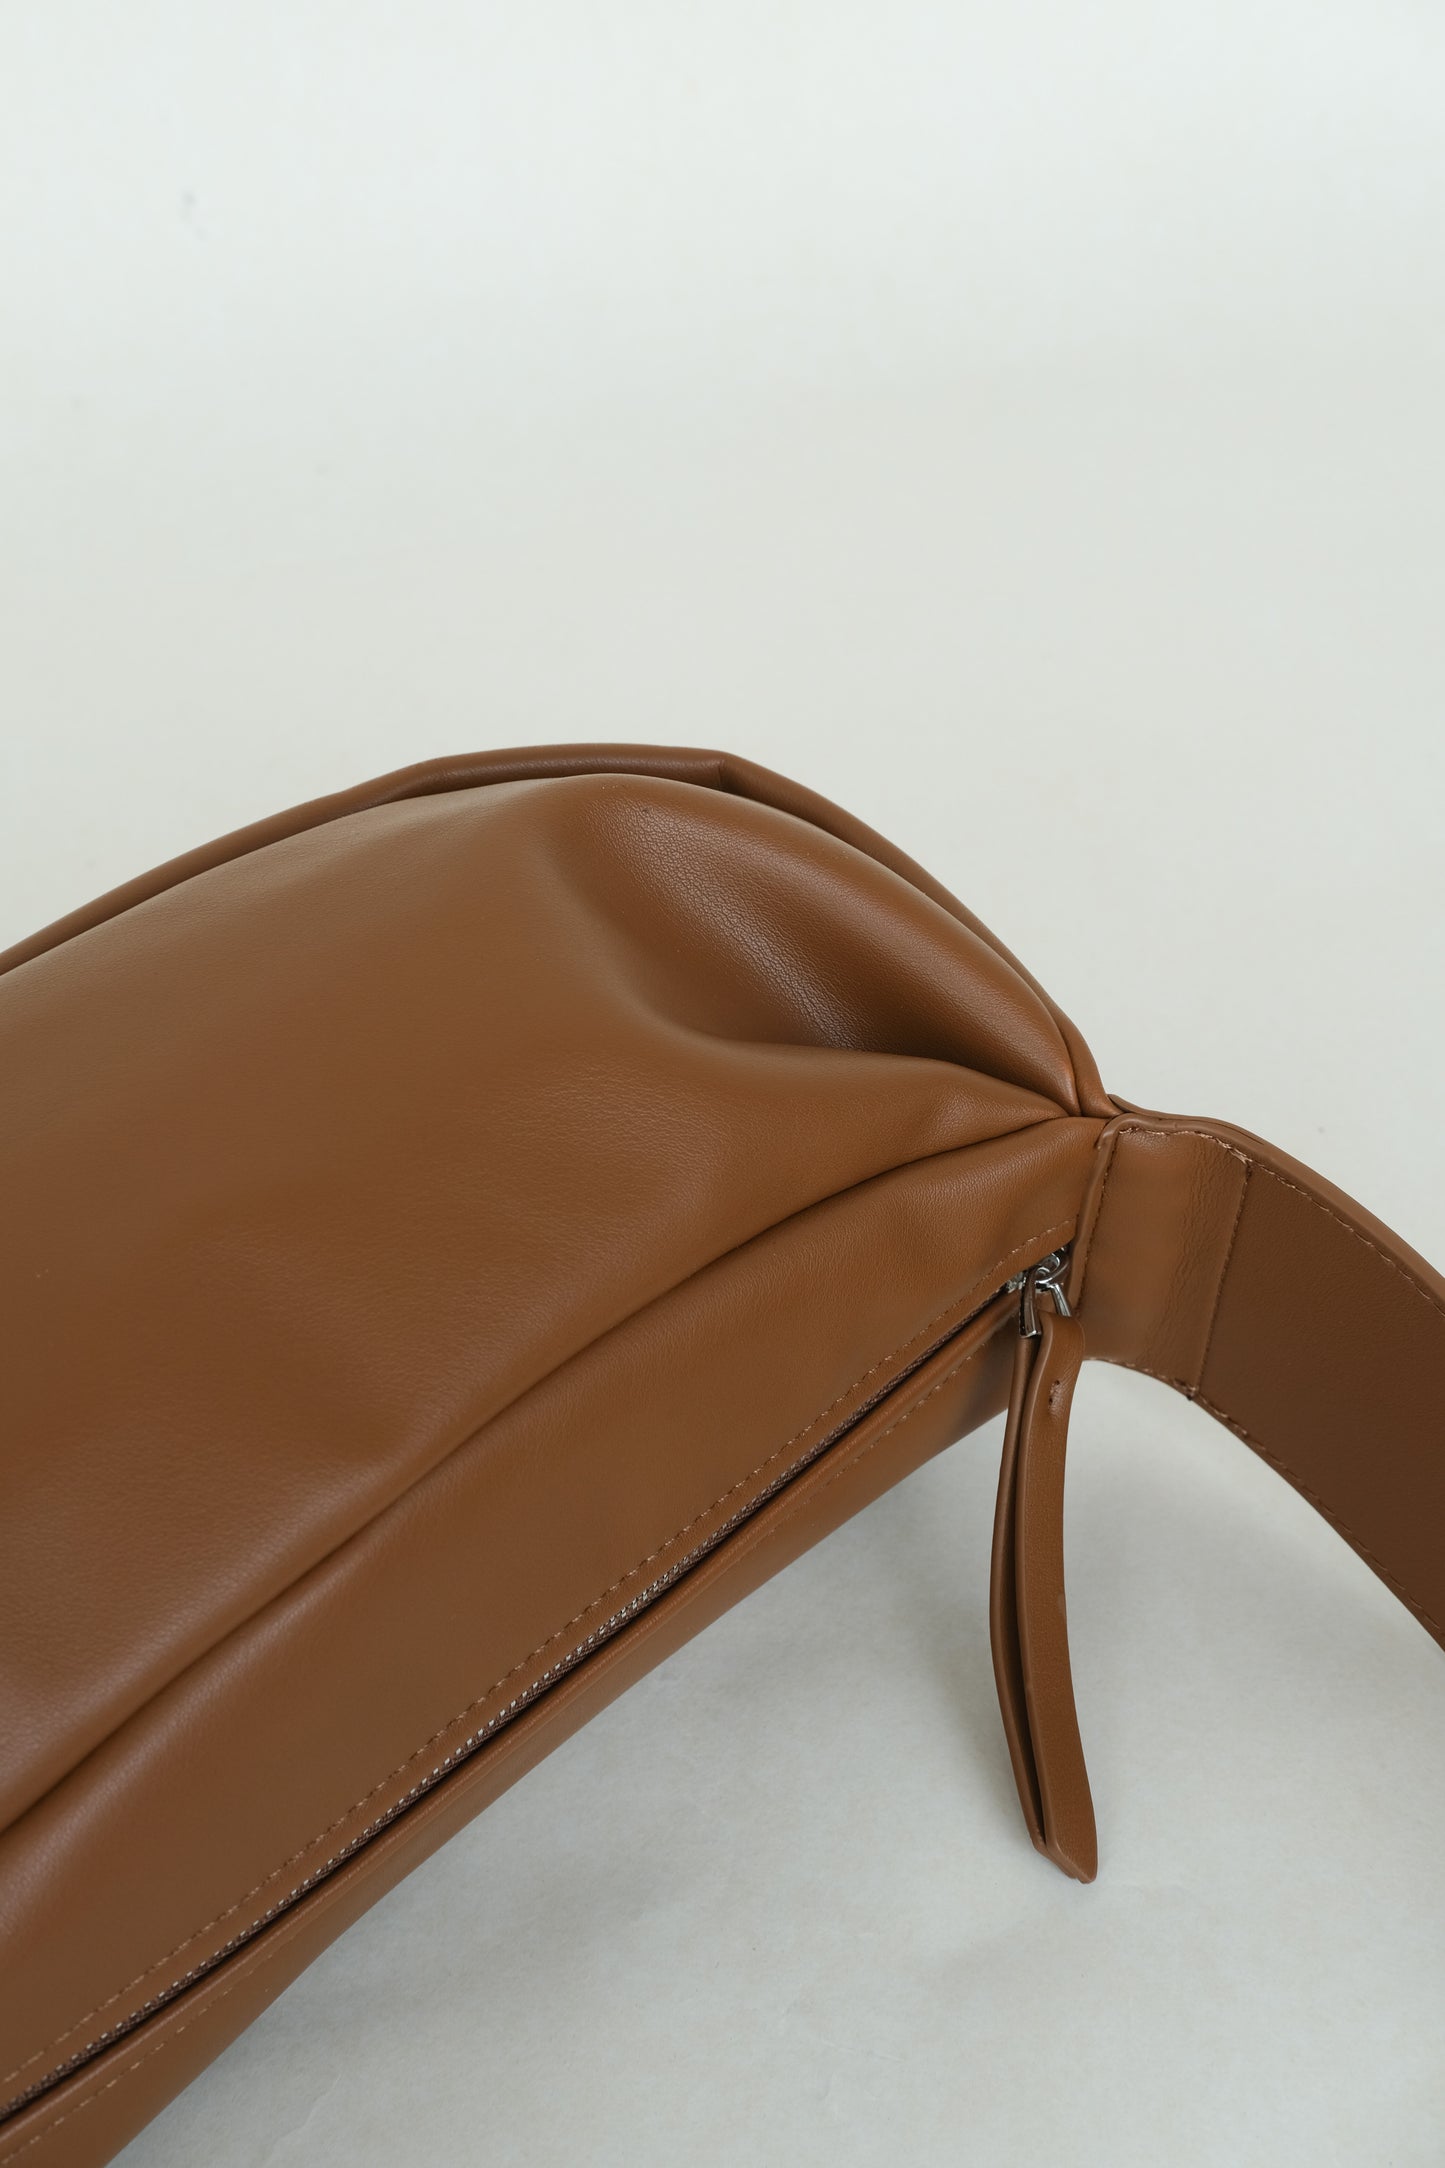 PU soft leather pillow bag in brown